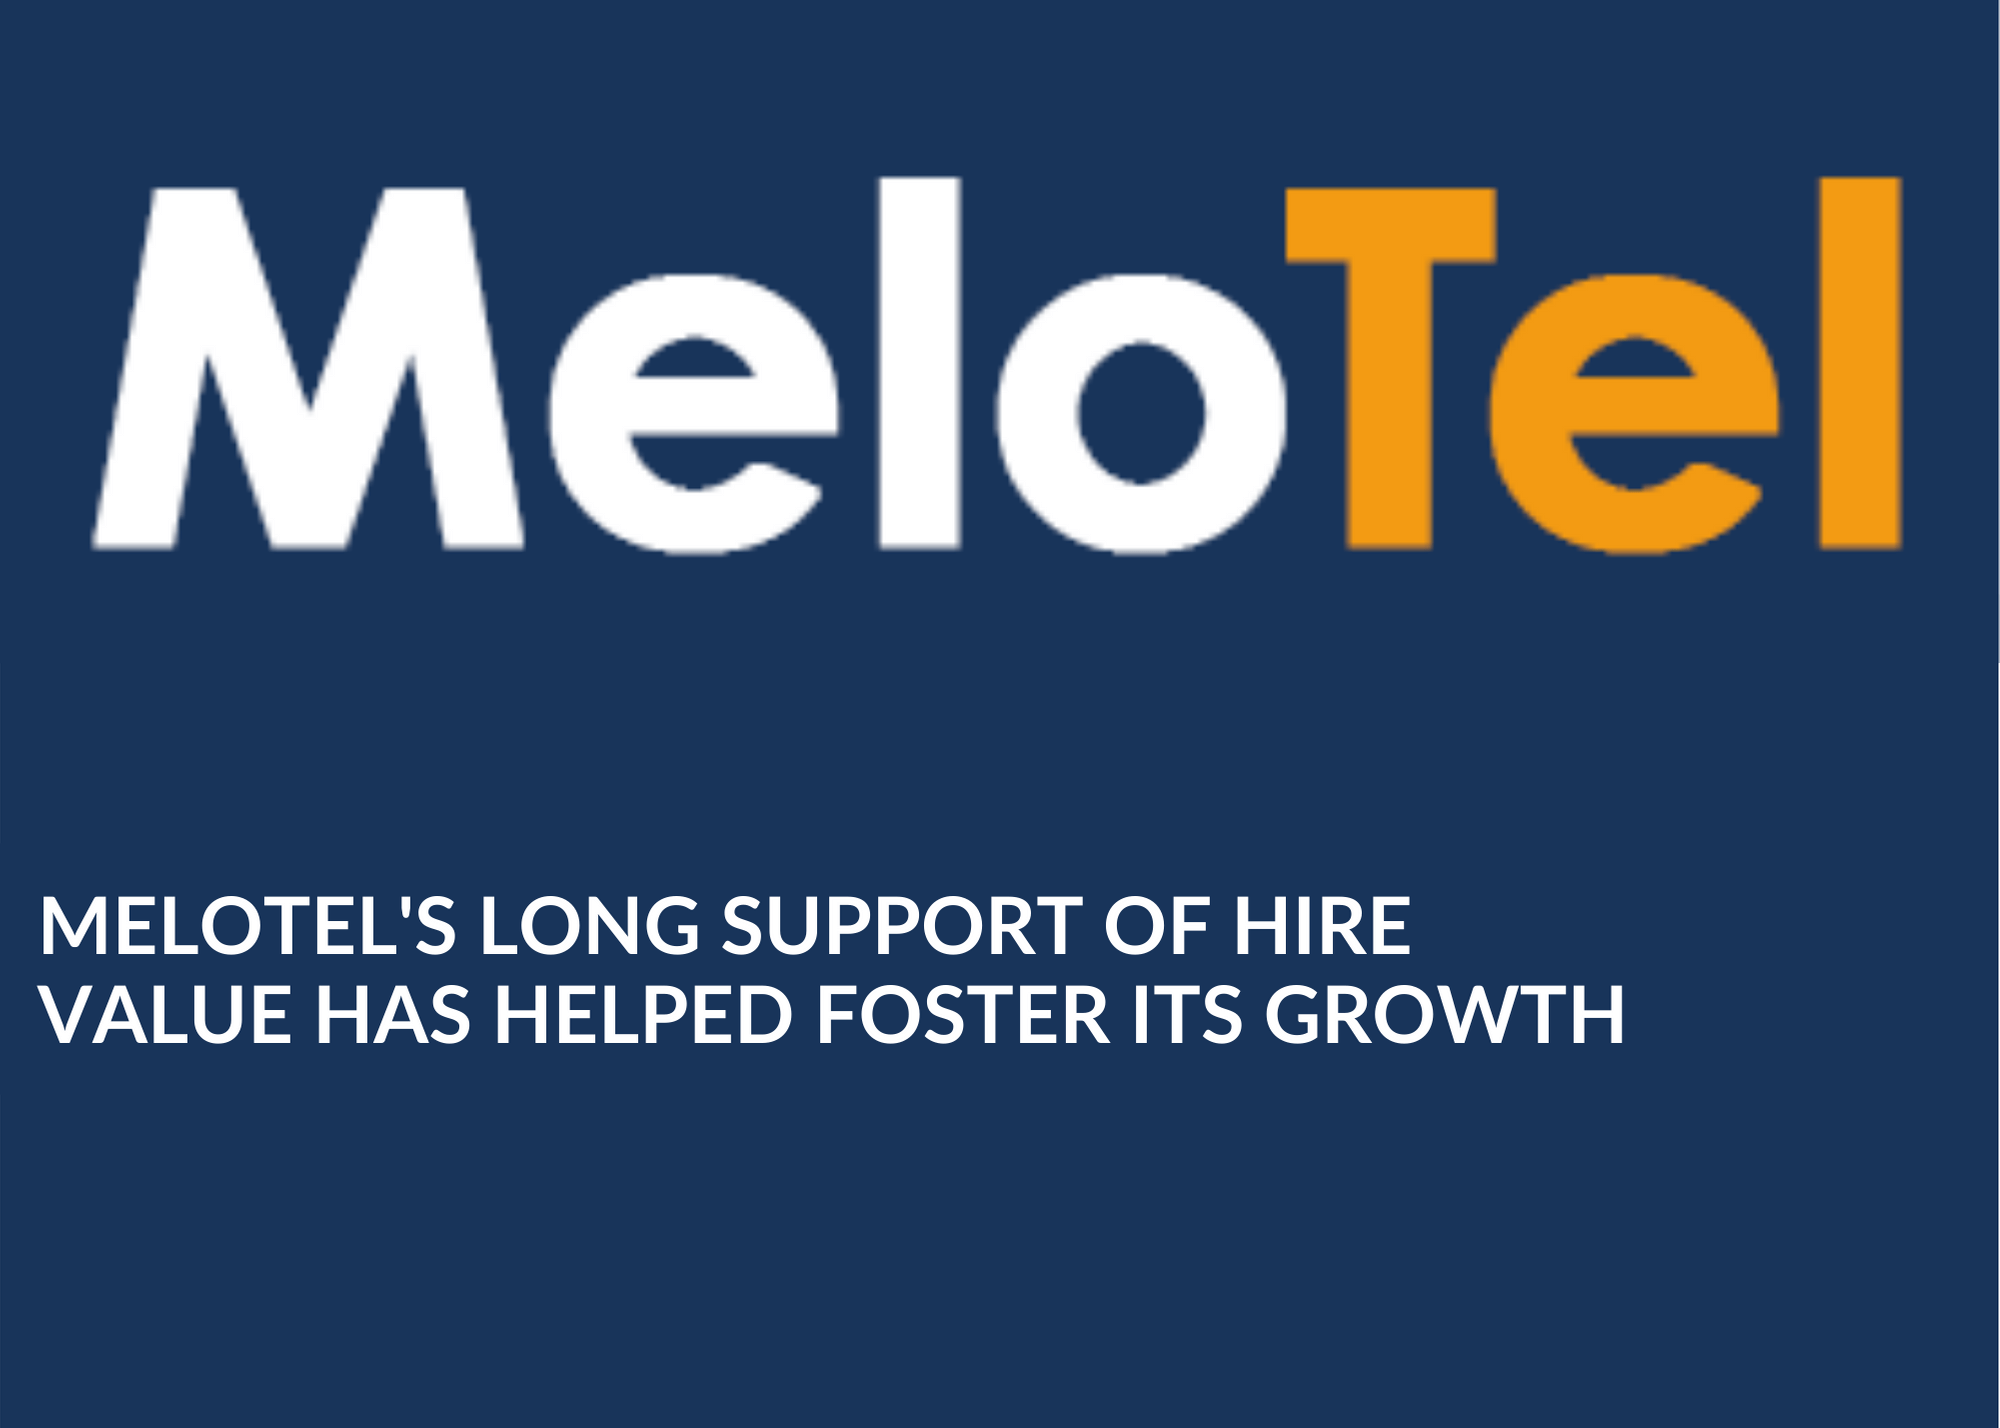 Melotel’s Long Support of Hire Value Has Helped Foster Its Growth